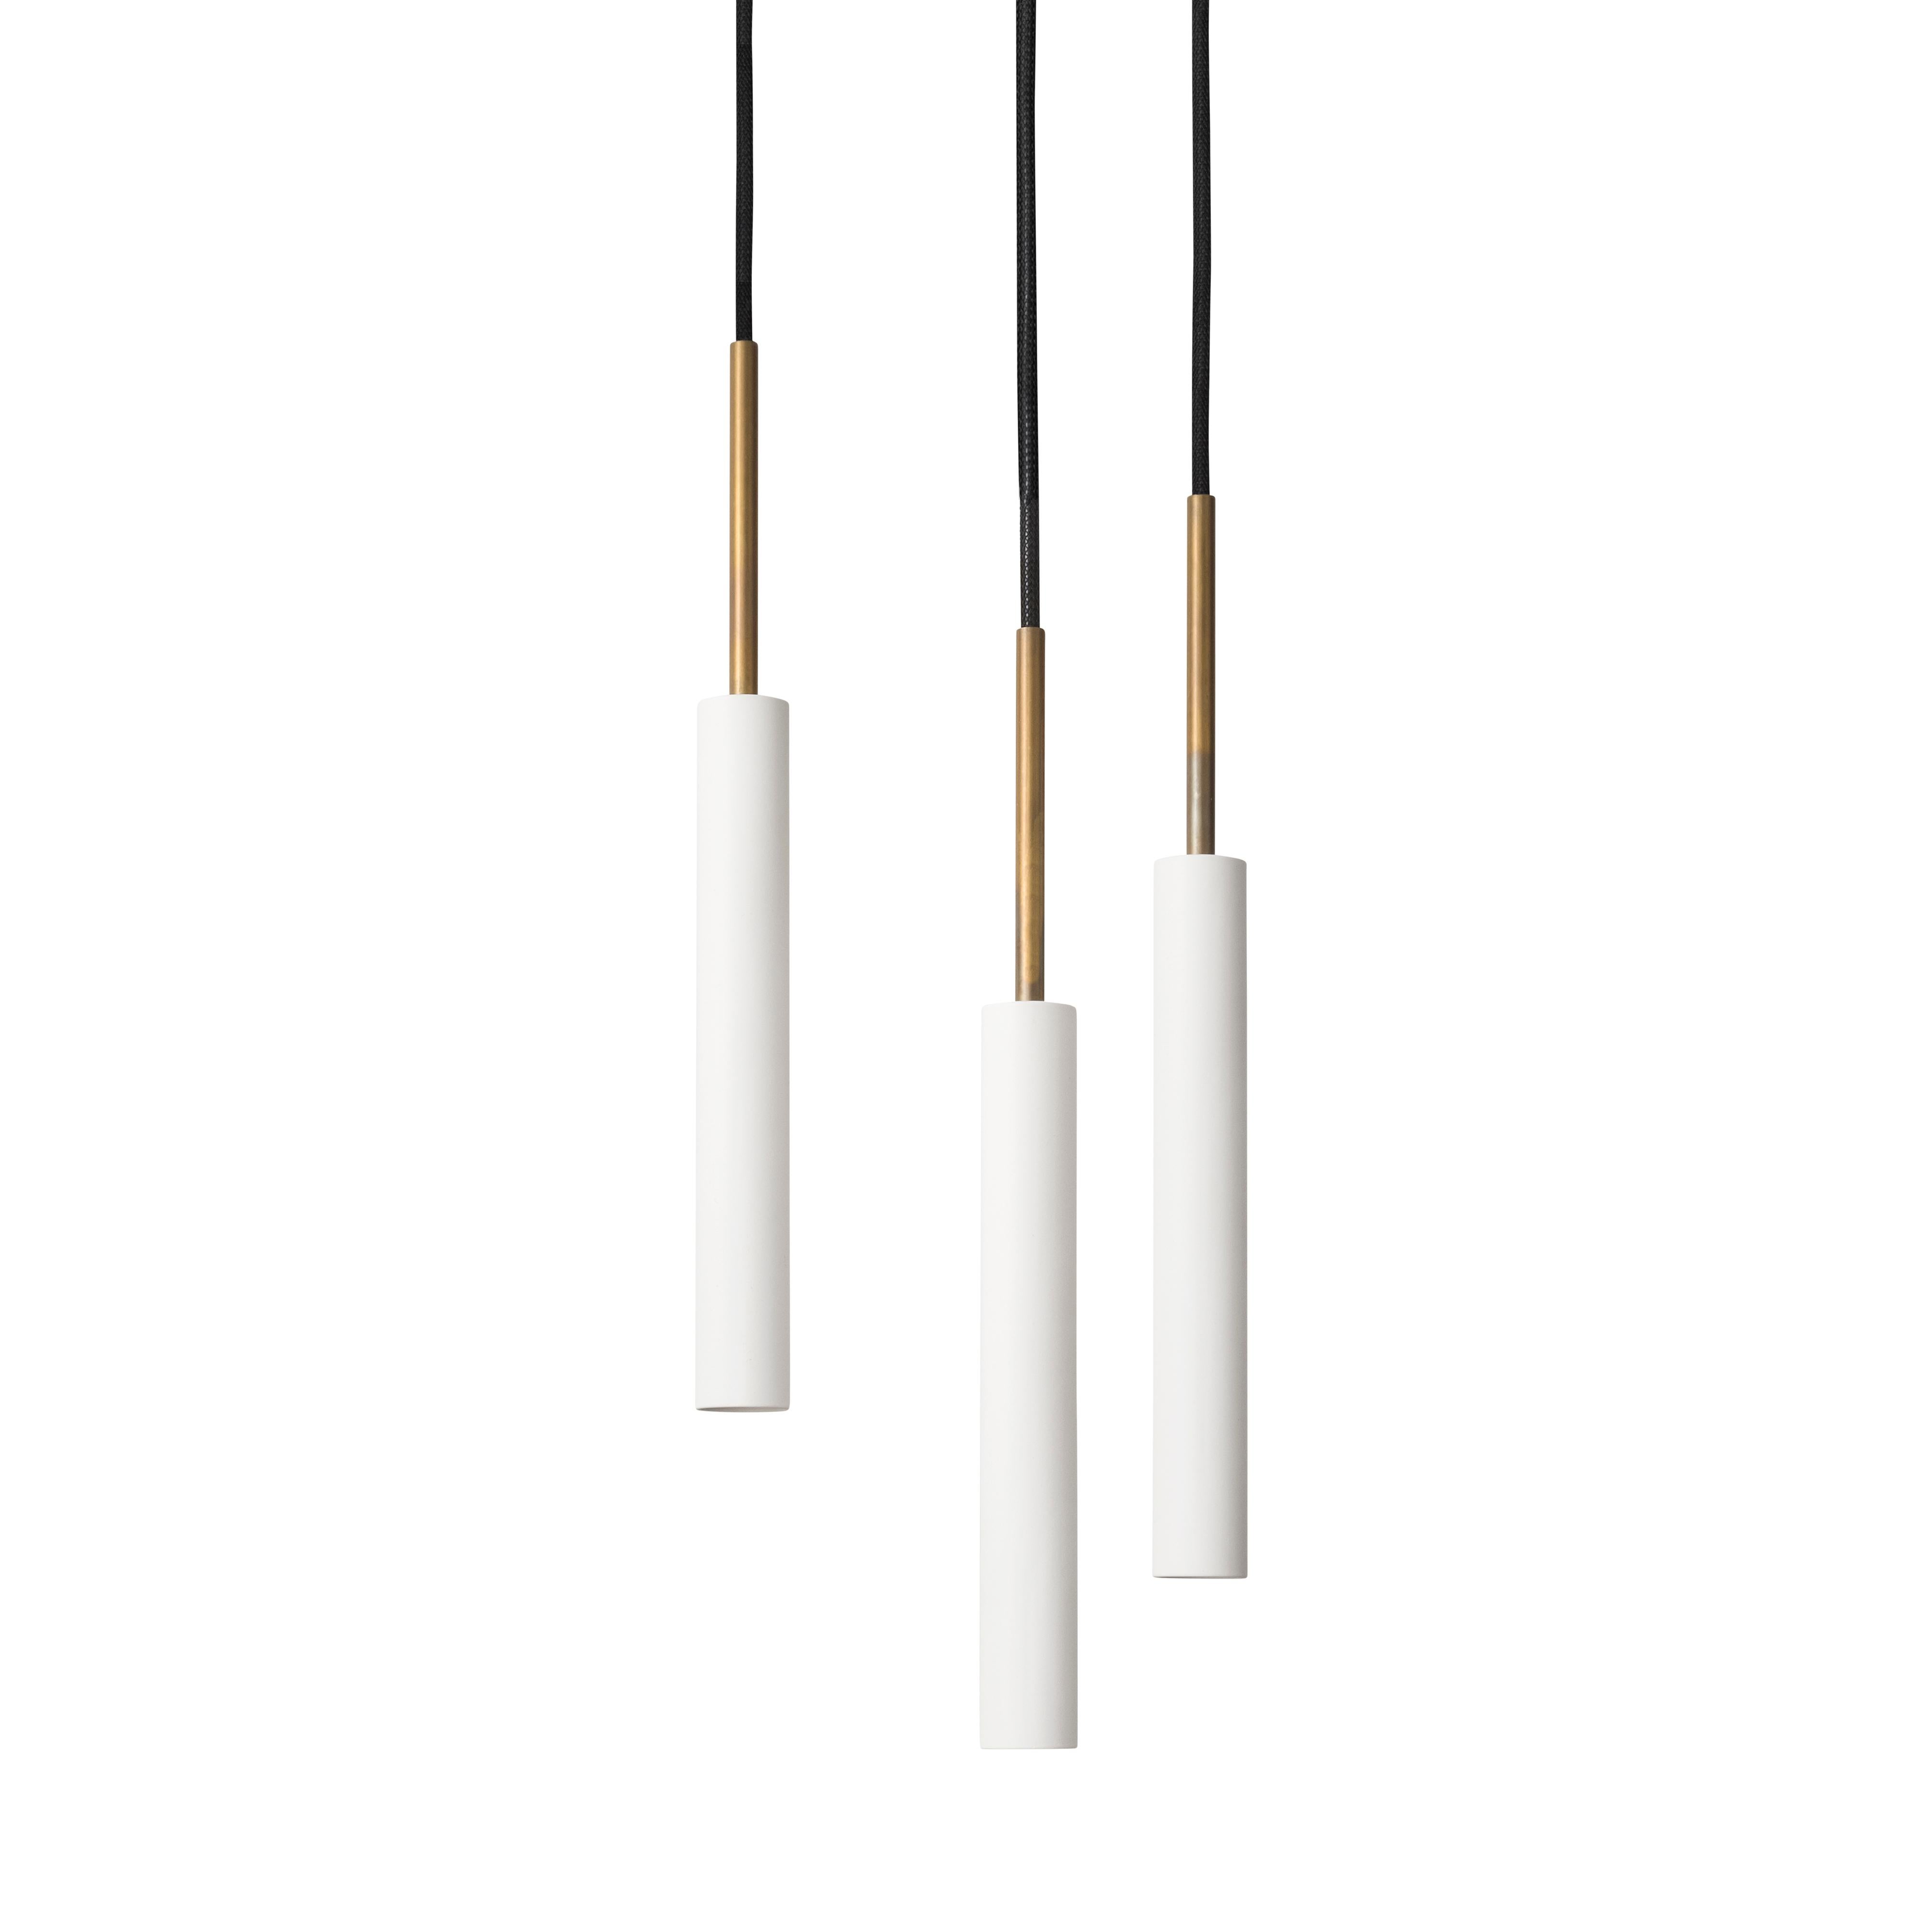 Ceiling lamp model Stav 3 designed by Johan Carpner and manufactured by Konsthantverk.

The production of lamps, wall lights and floor lamps are manufactured using craftsman’s techniques with the same materials and techniques as the first